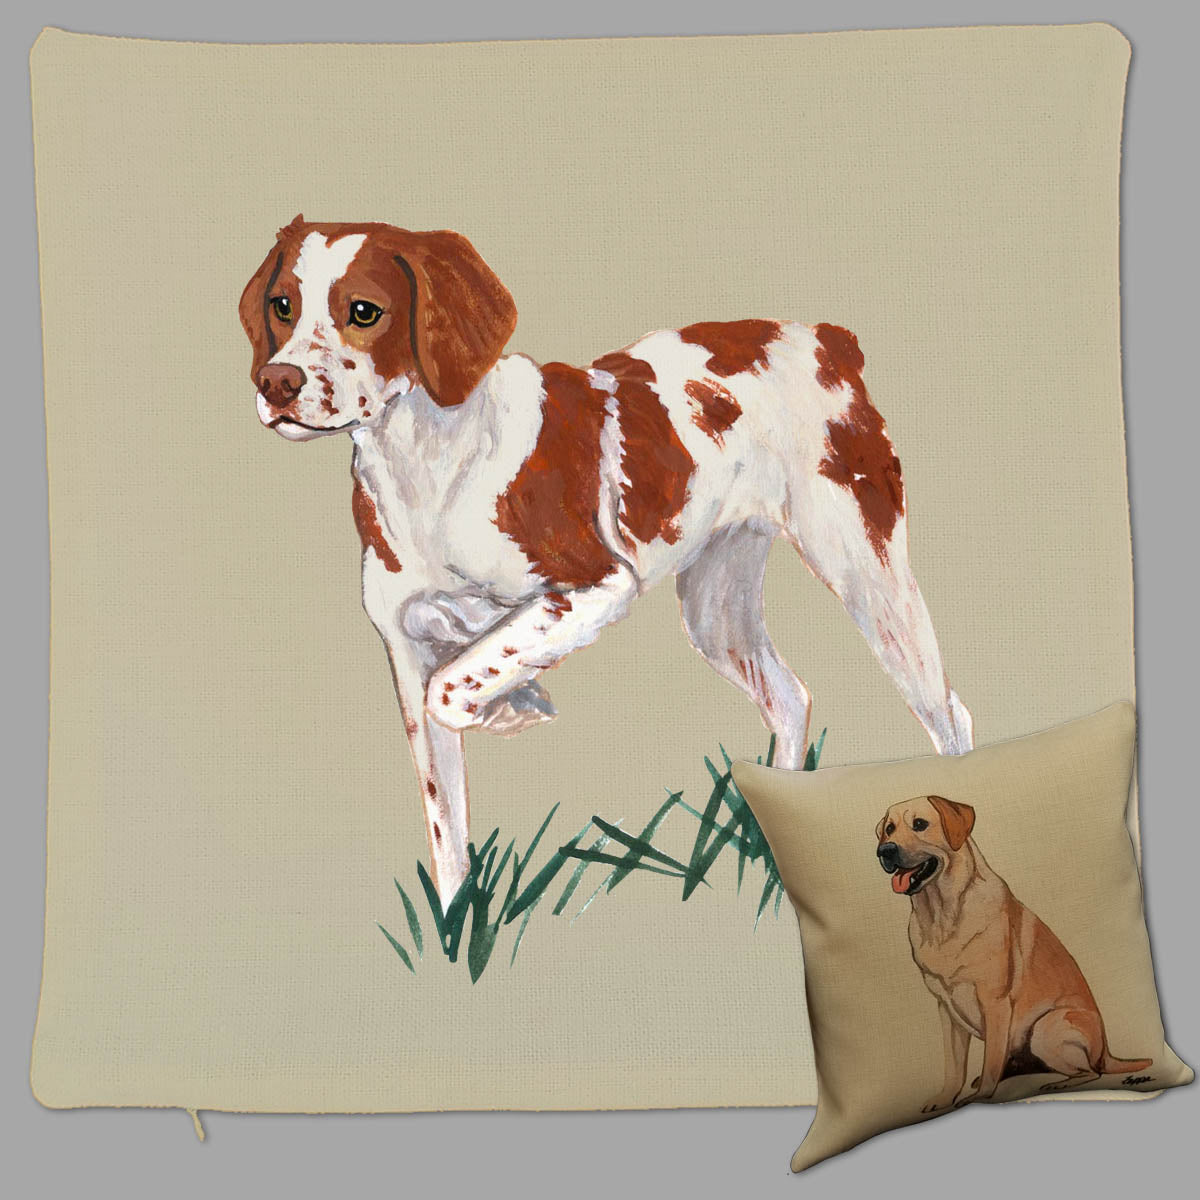 Brittany Throw Pillow